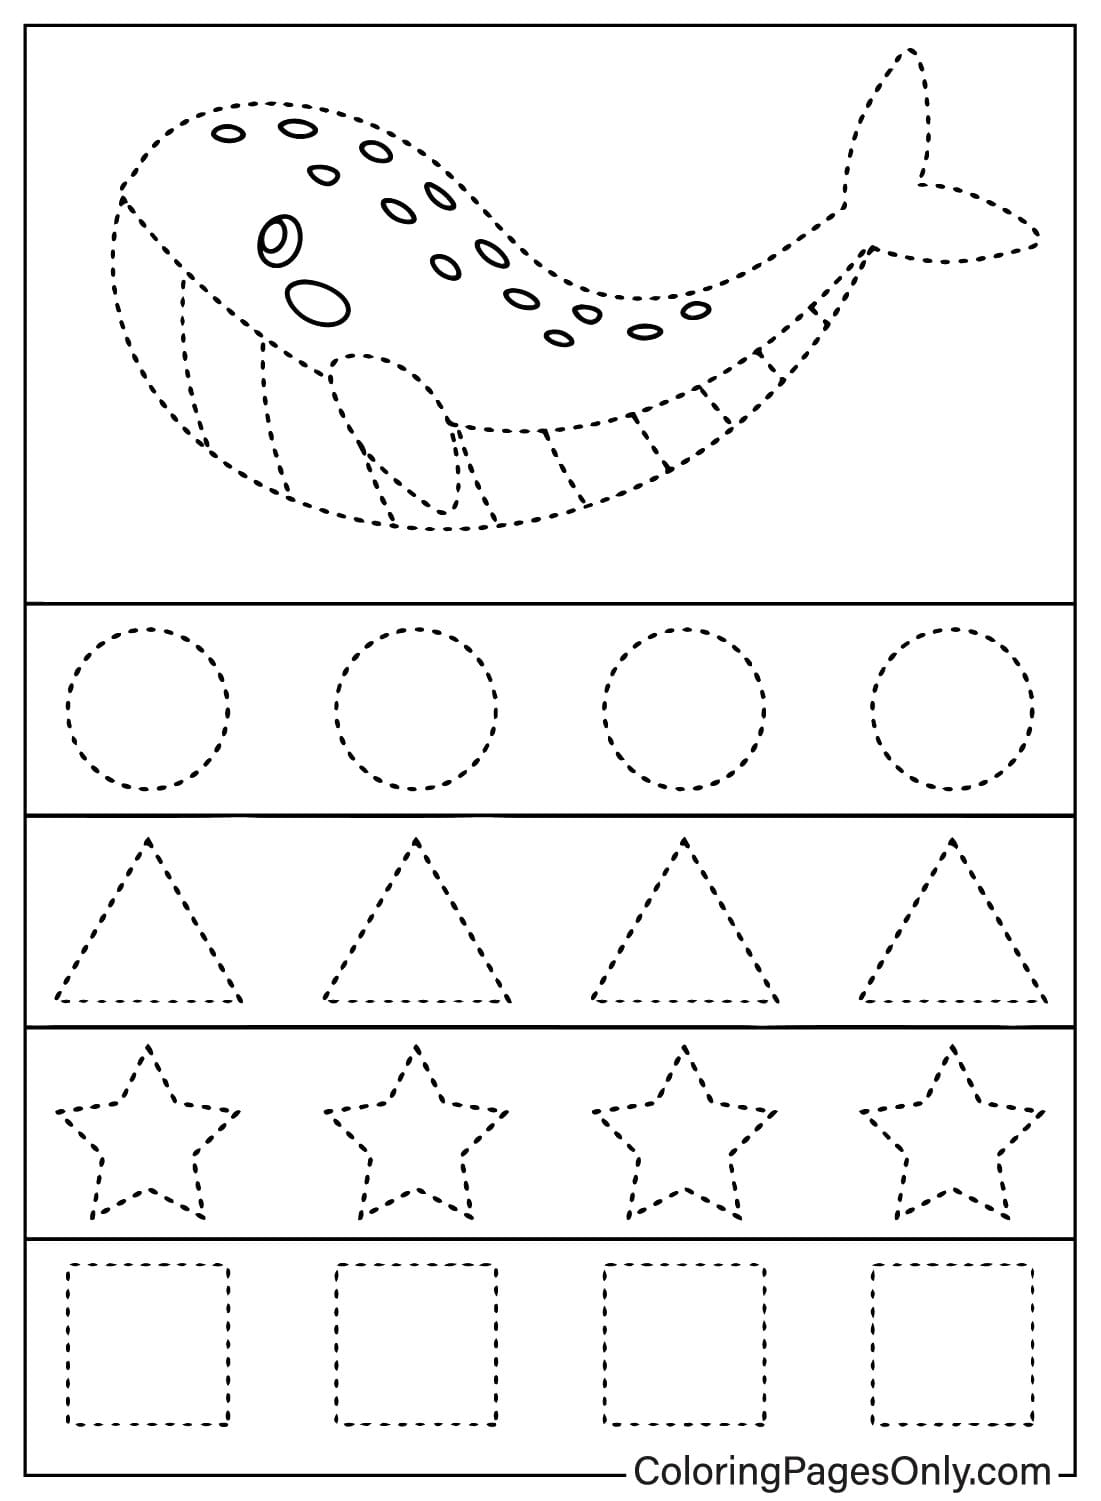 printable airplane coloring pages